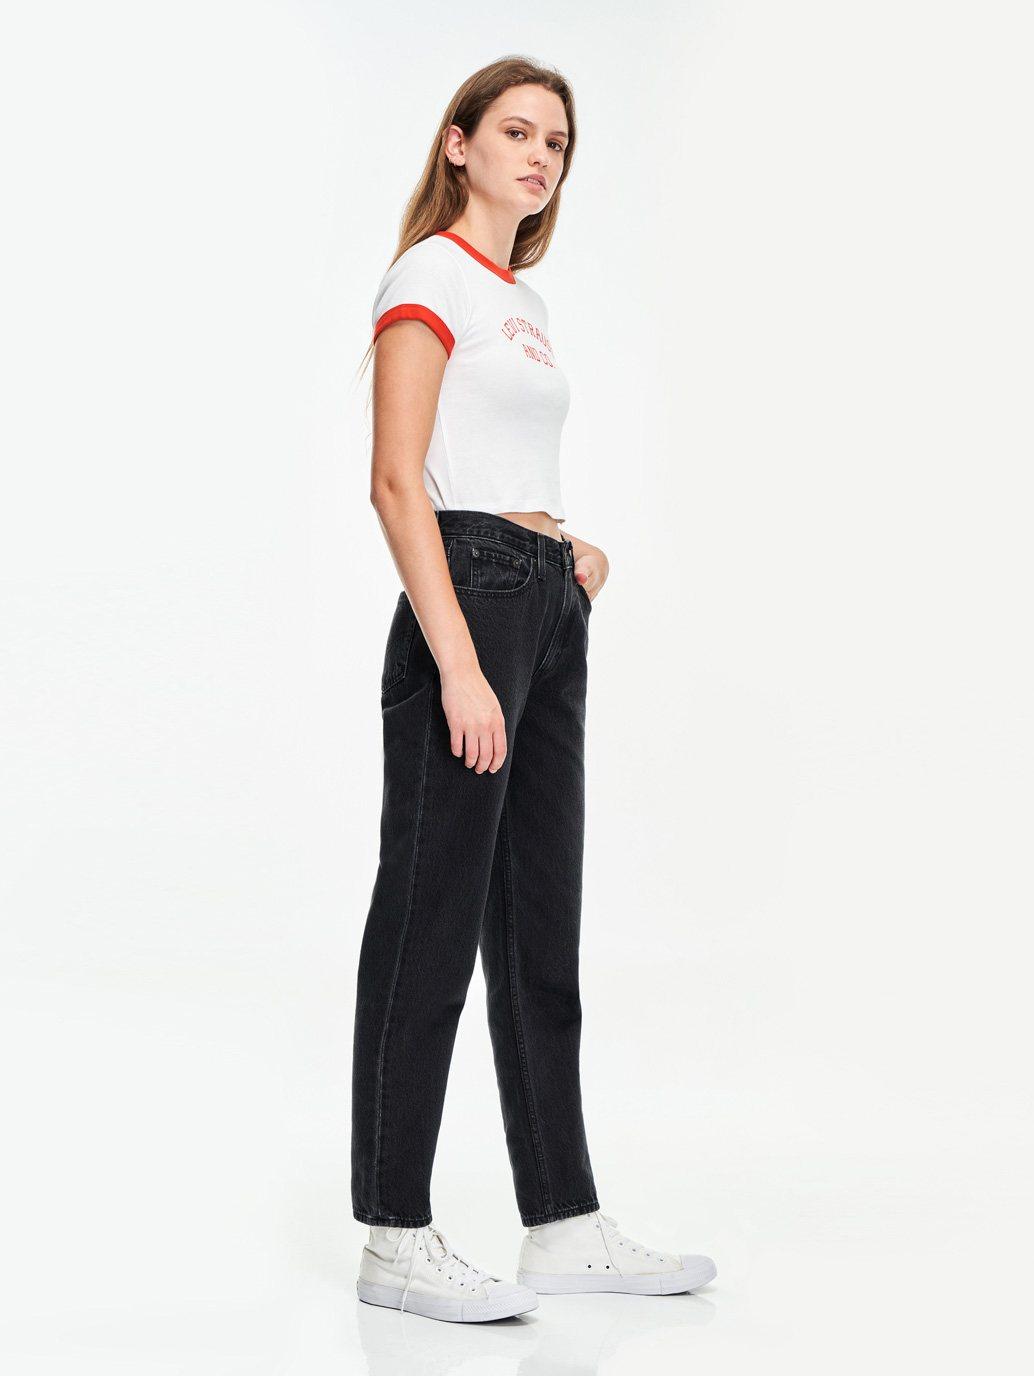 levis singapore womens 80s mom jeans A35060006 03 Side